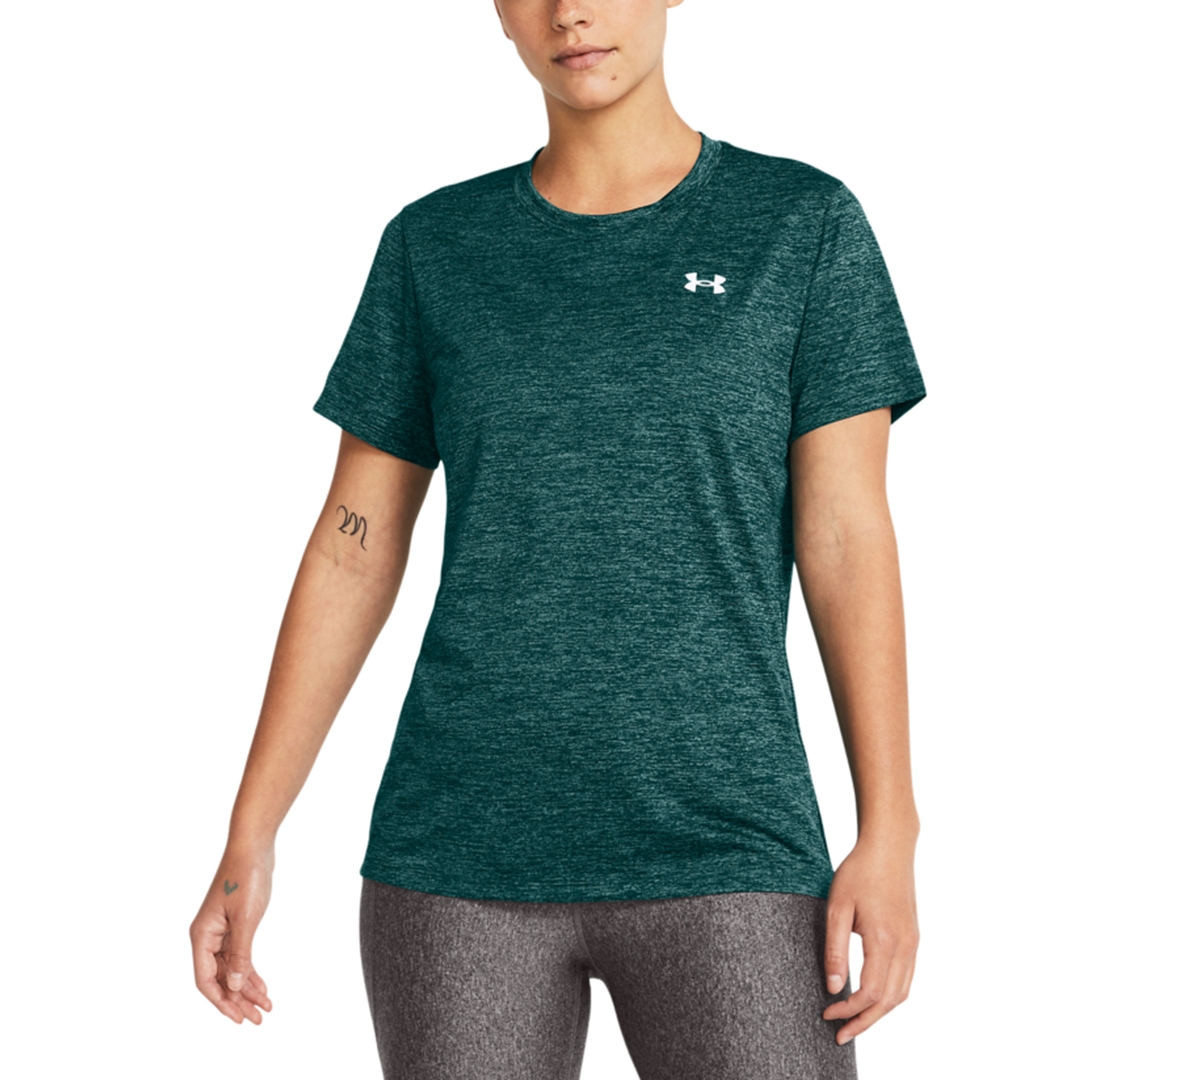 Under Armour Women's Tech Twist Short-sleeve Top In Hydro Teal,white